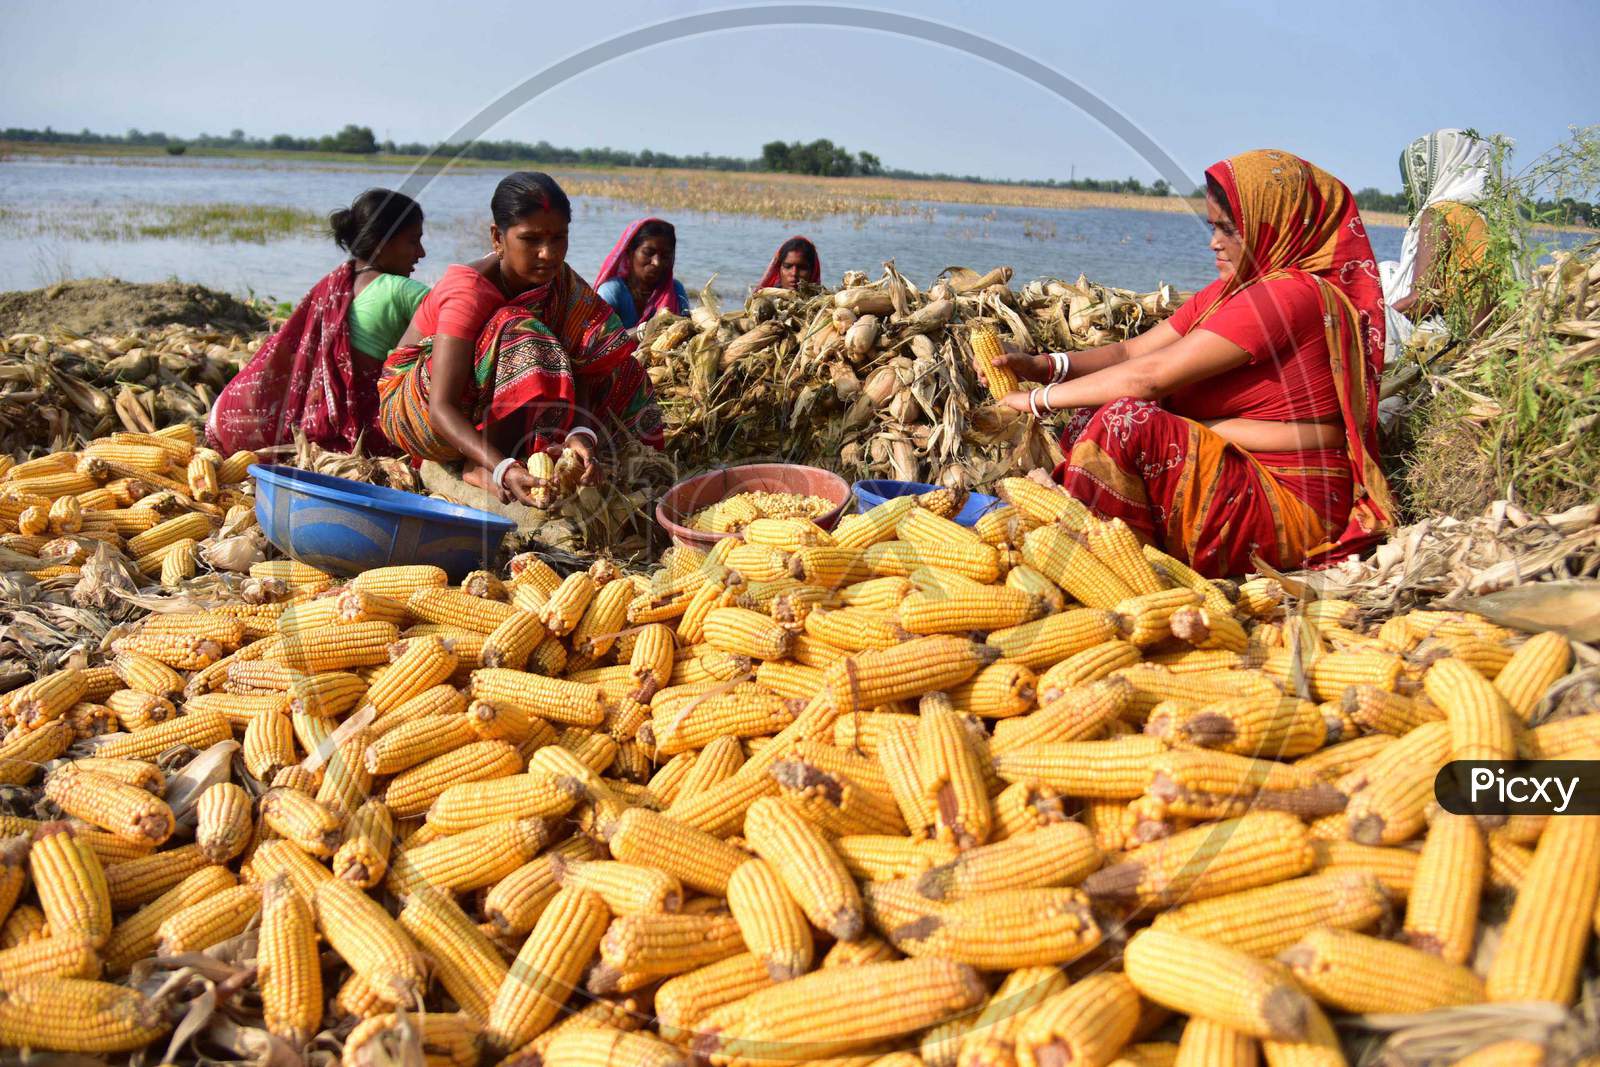 Indian Women Peeling Off The Maize After Harvesting In Morigaon District Of Assam, India  On June 5, 2020